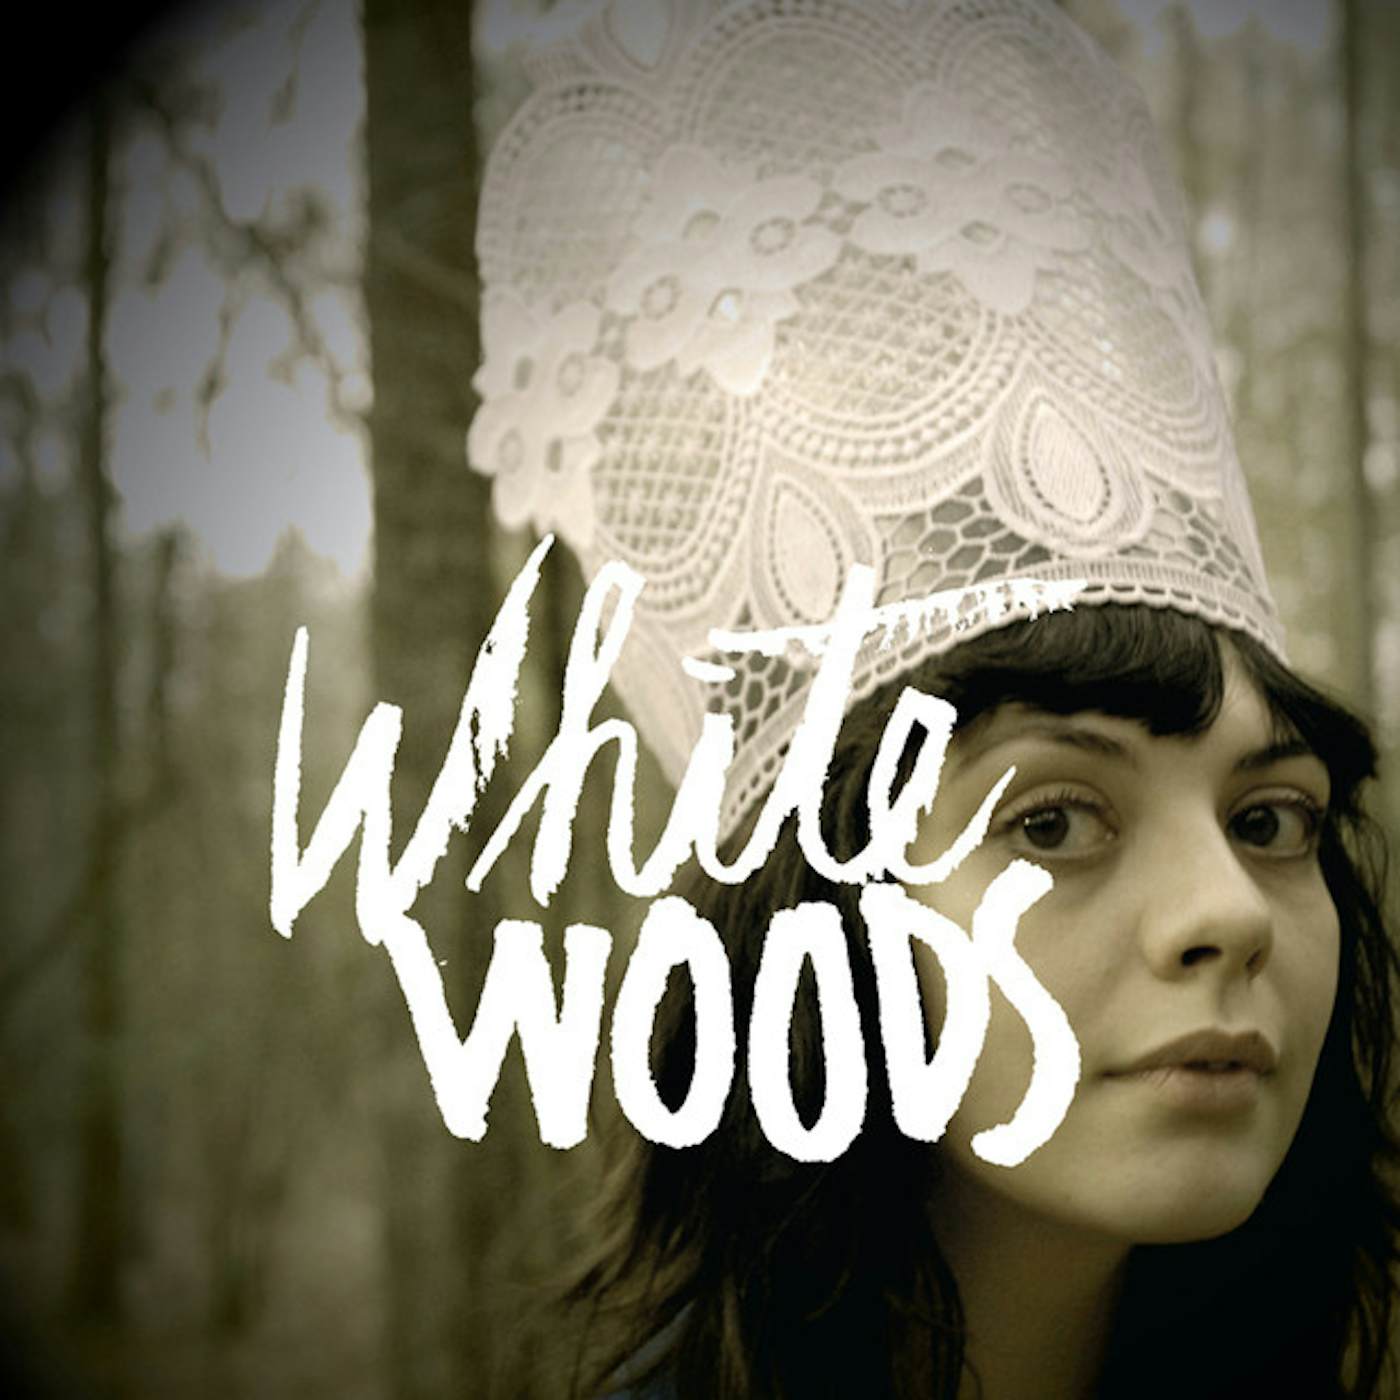 White Woods Where Did You Go Vinyl Record